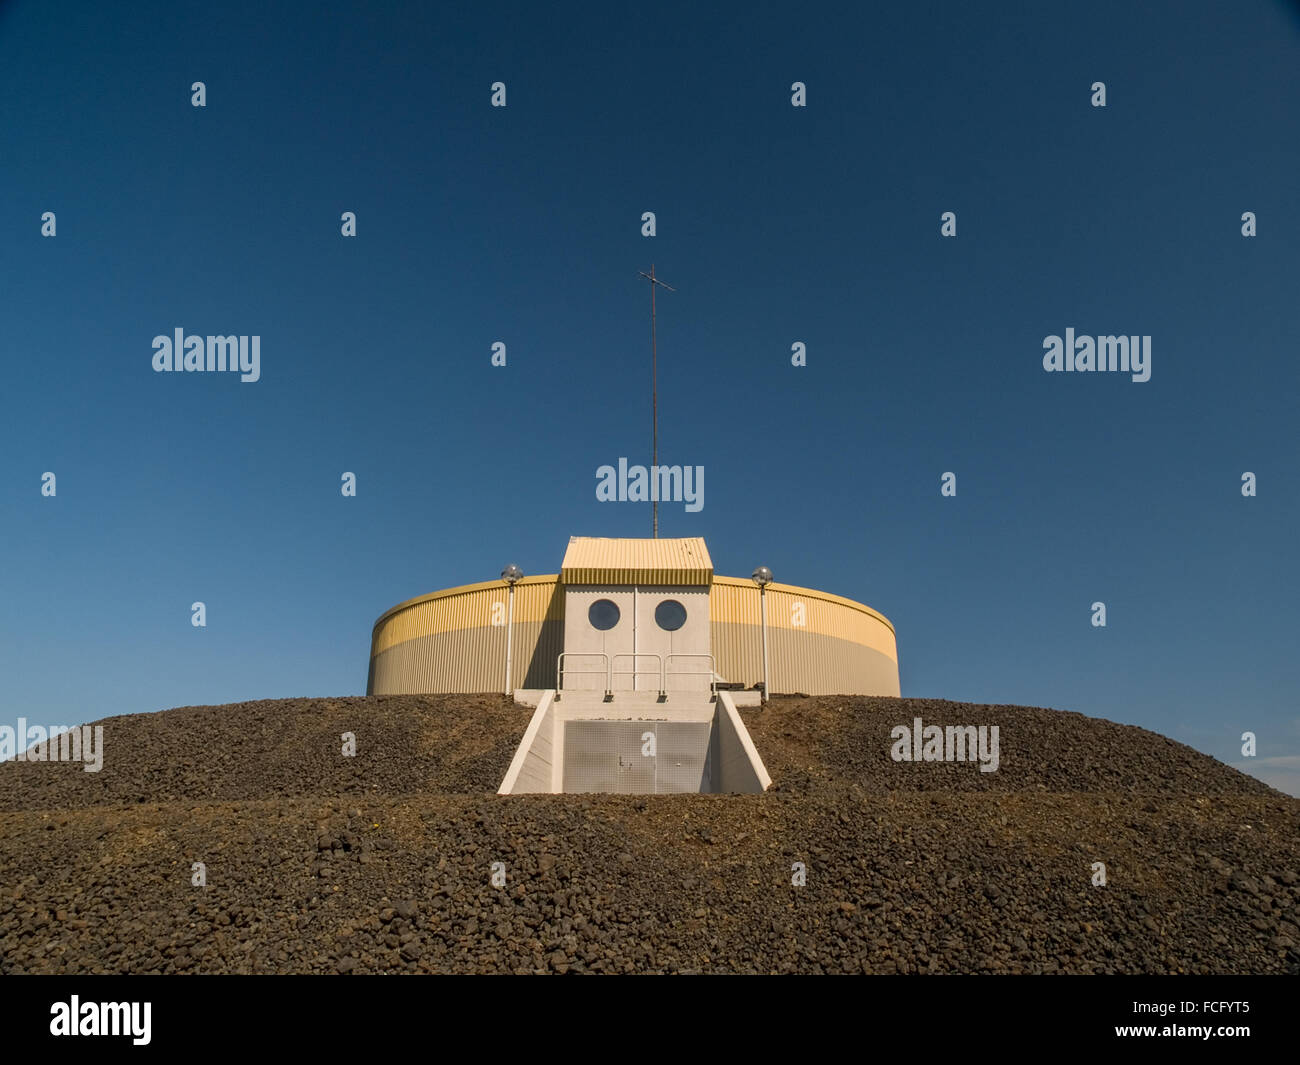 Circular industrial yellow and gray building on top of gravel platform against a blue clear sky near Keflavik Iceland. Stock Photo